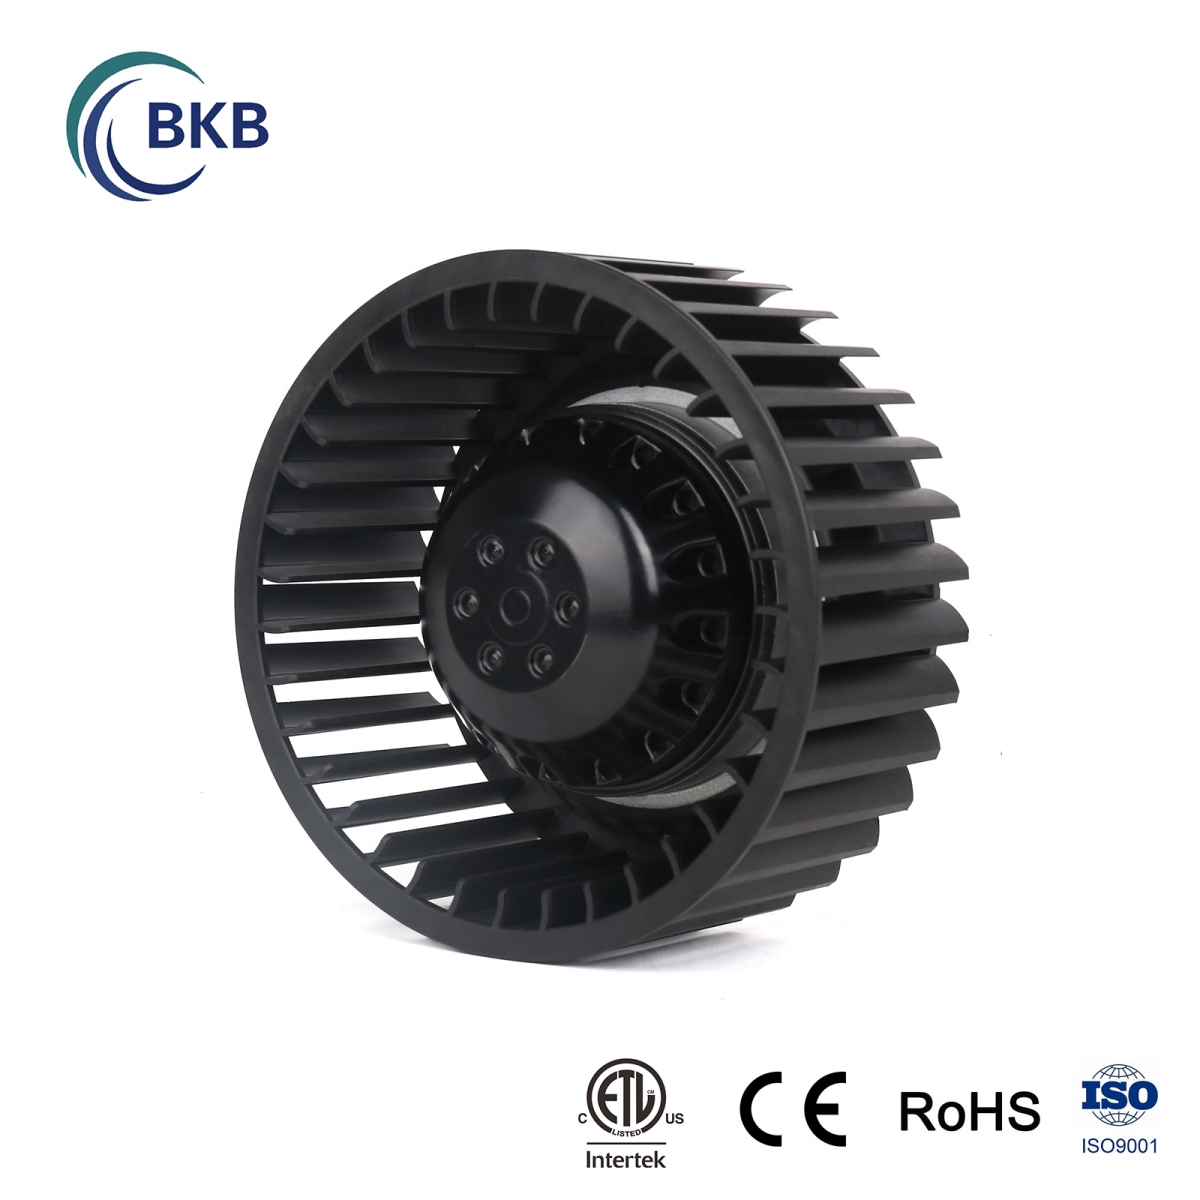 What is the purpose of centrifugal fan?-SUNLIGHT BLOWER,Centrifugal Fans, Inline Fans,Motors,Backward curved centrifugal fans ,Forward curved centrifugal fans ,inlet fans, EC fans